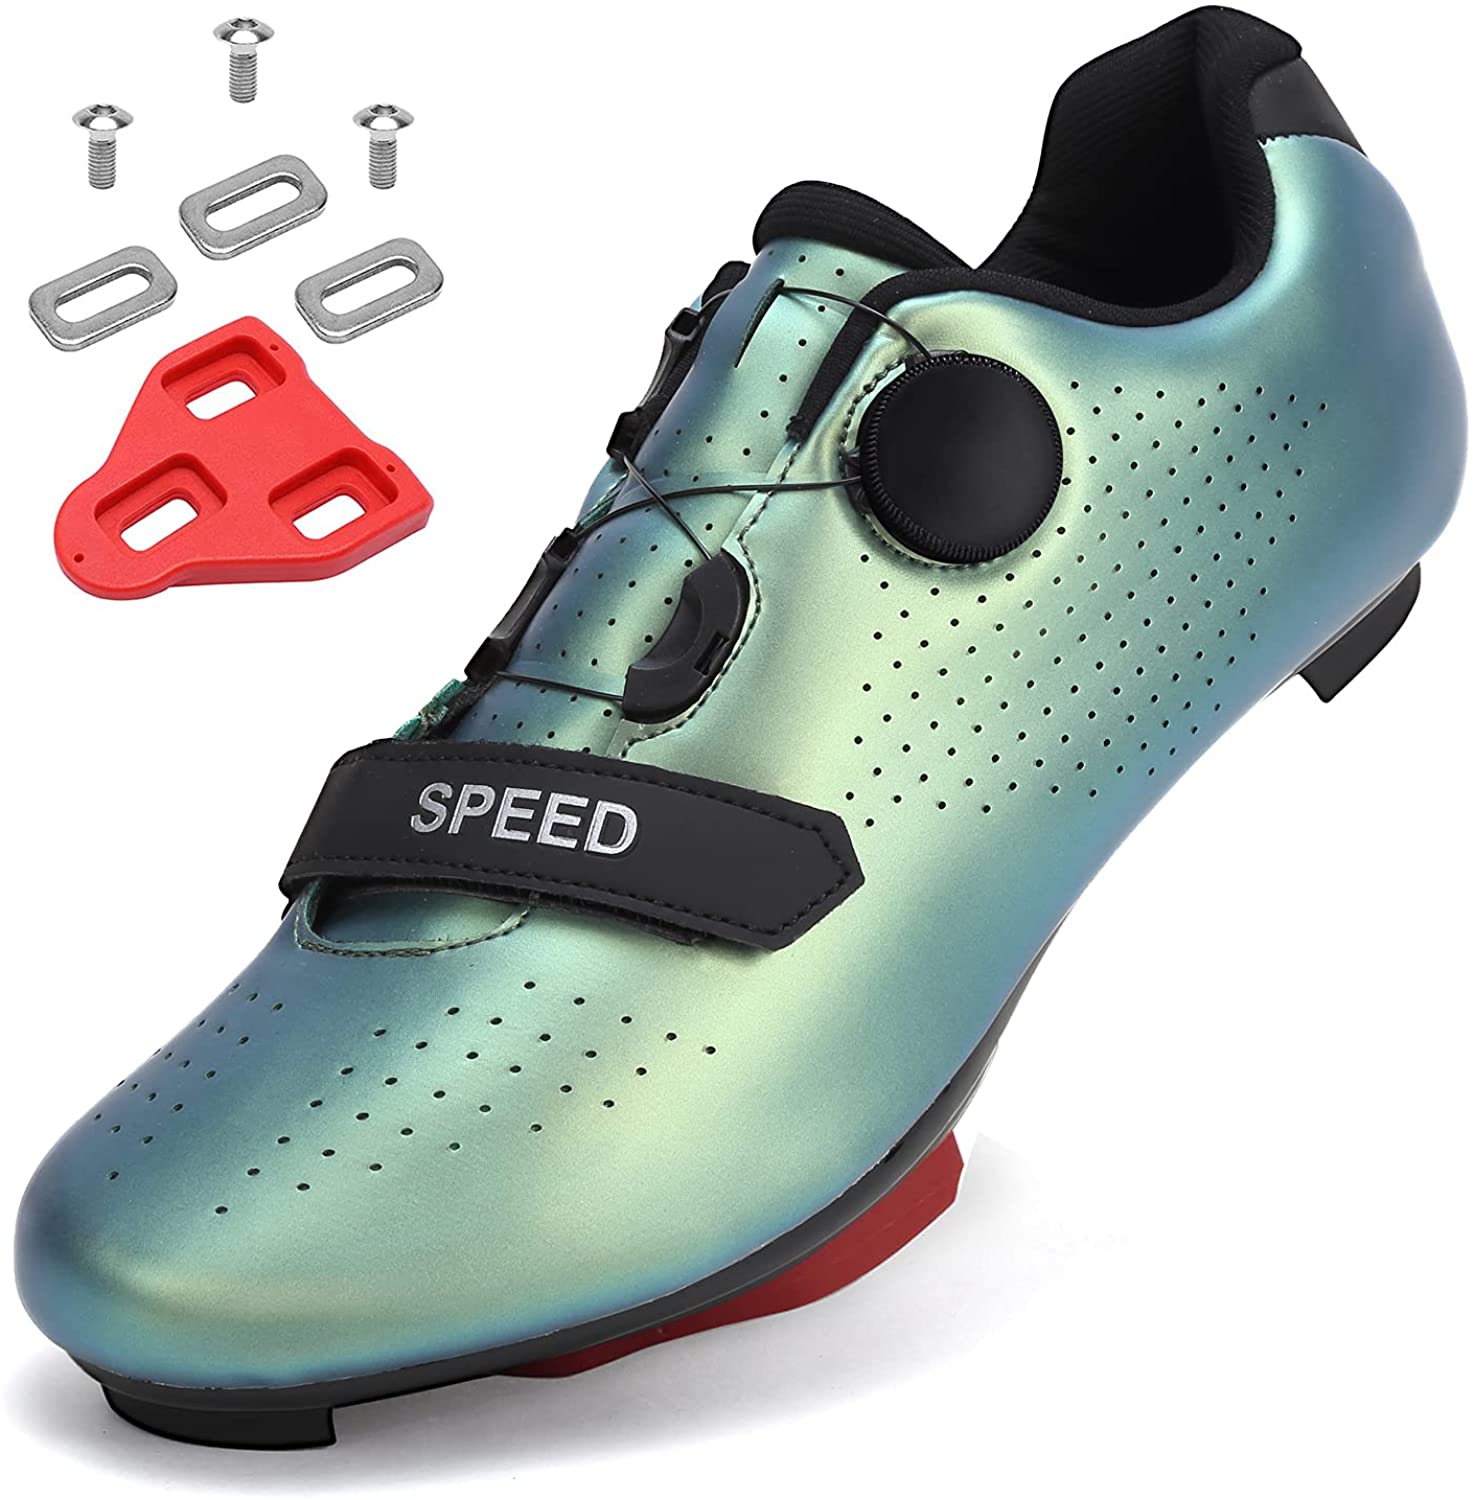 SWISSWELL Mens Womens Road Bike Cycling Shoes Peloton Bike Shoes Compatible SPD Riding Shoes Lock Pedal Bike Shoes Indoor Outdoor